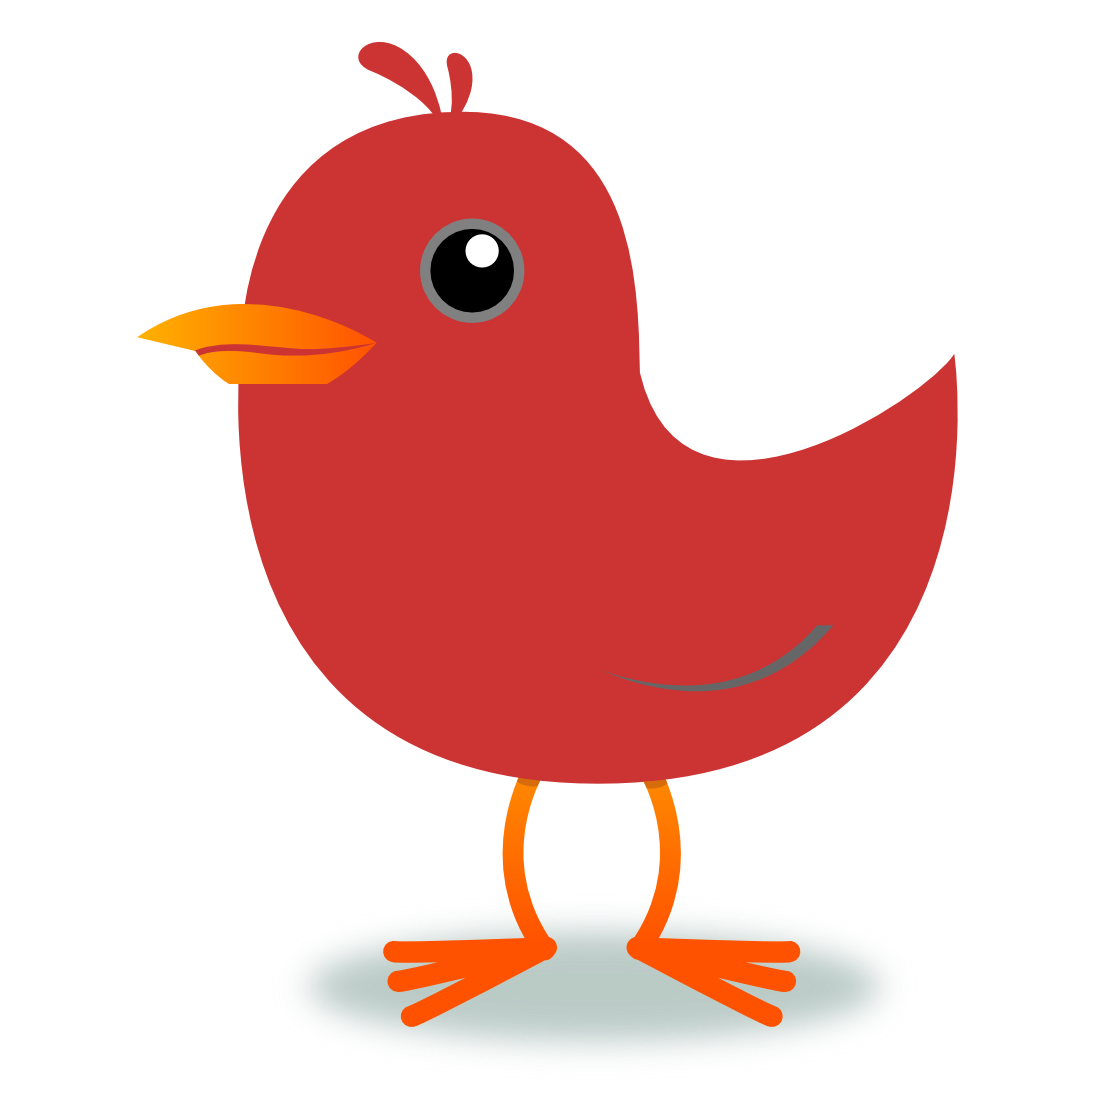 Clip Art Of Bird Image Png Image Clipart